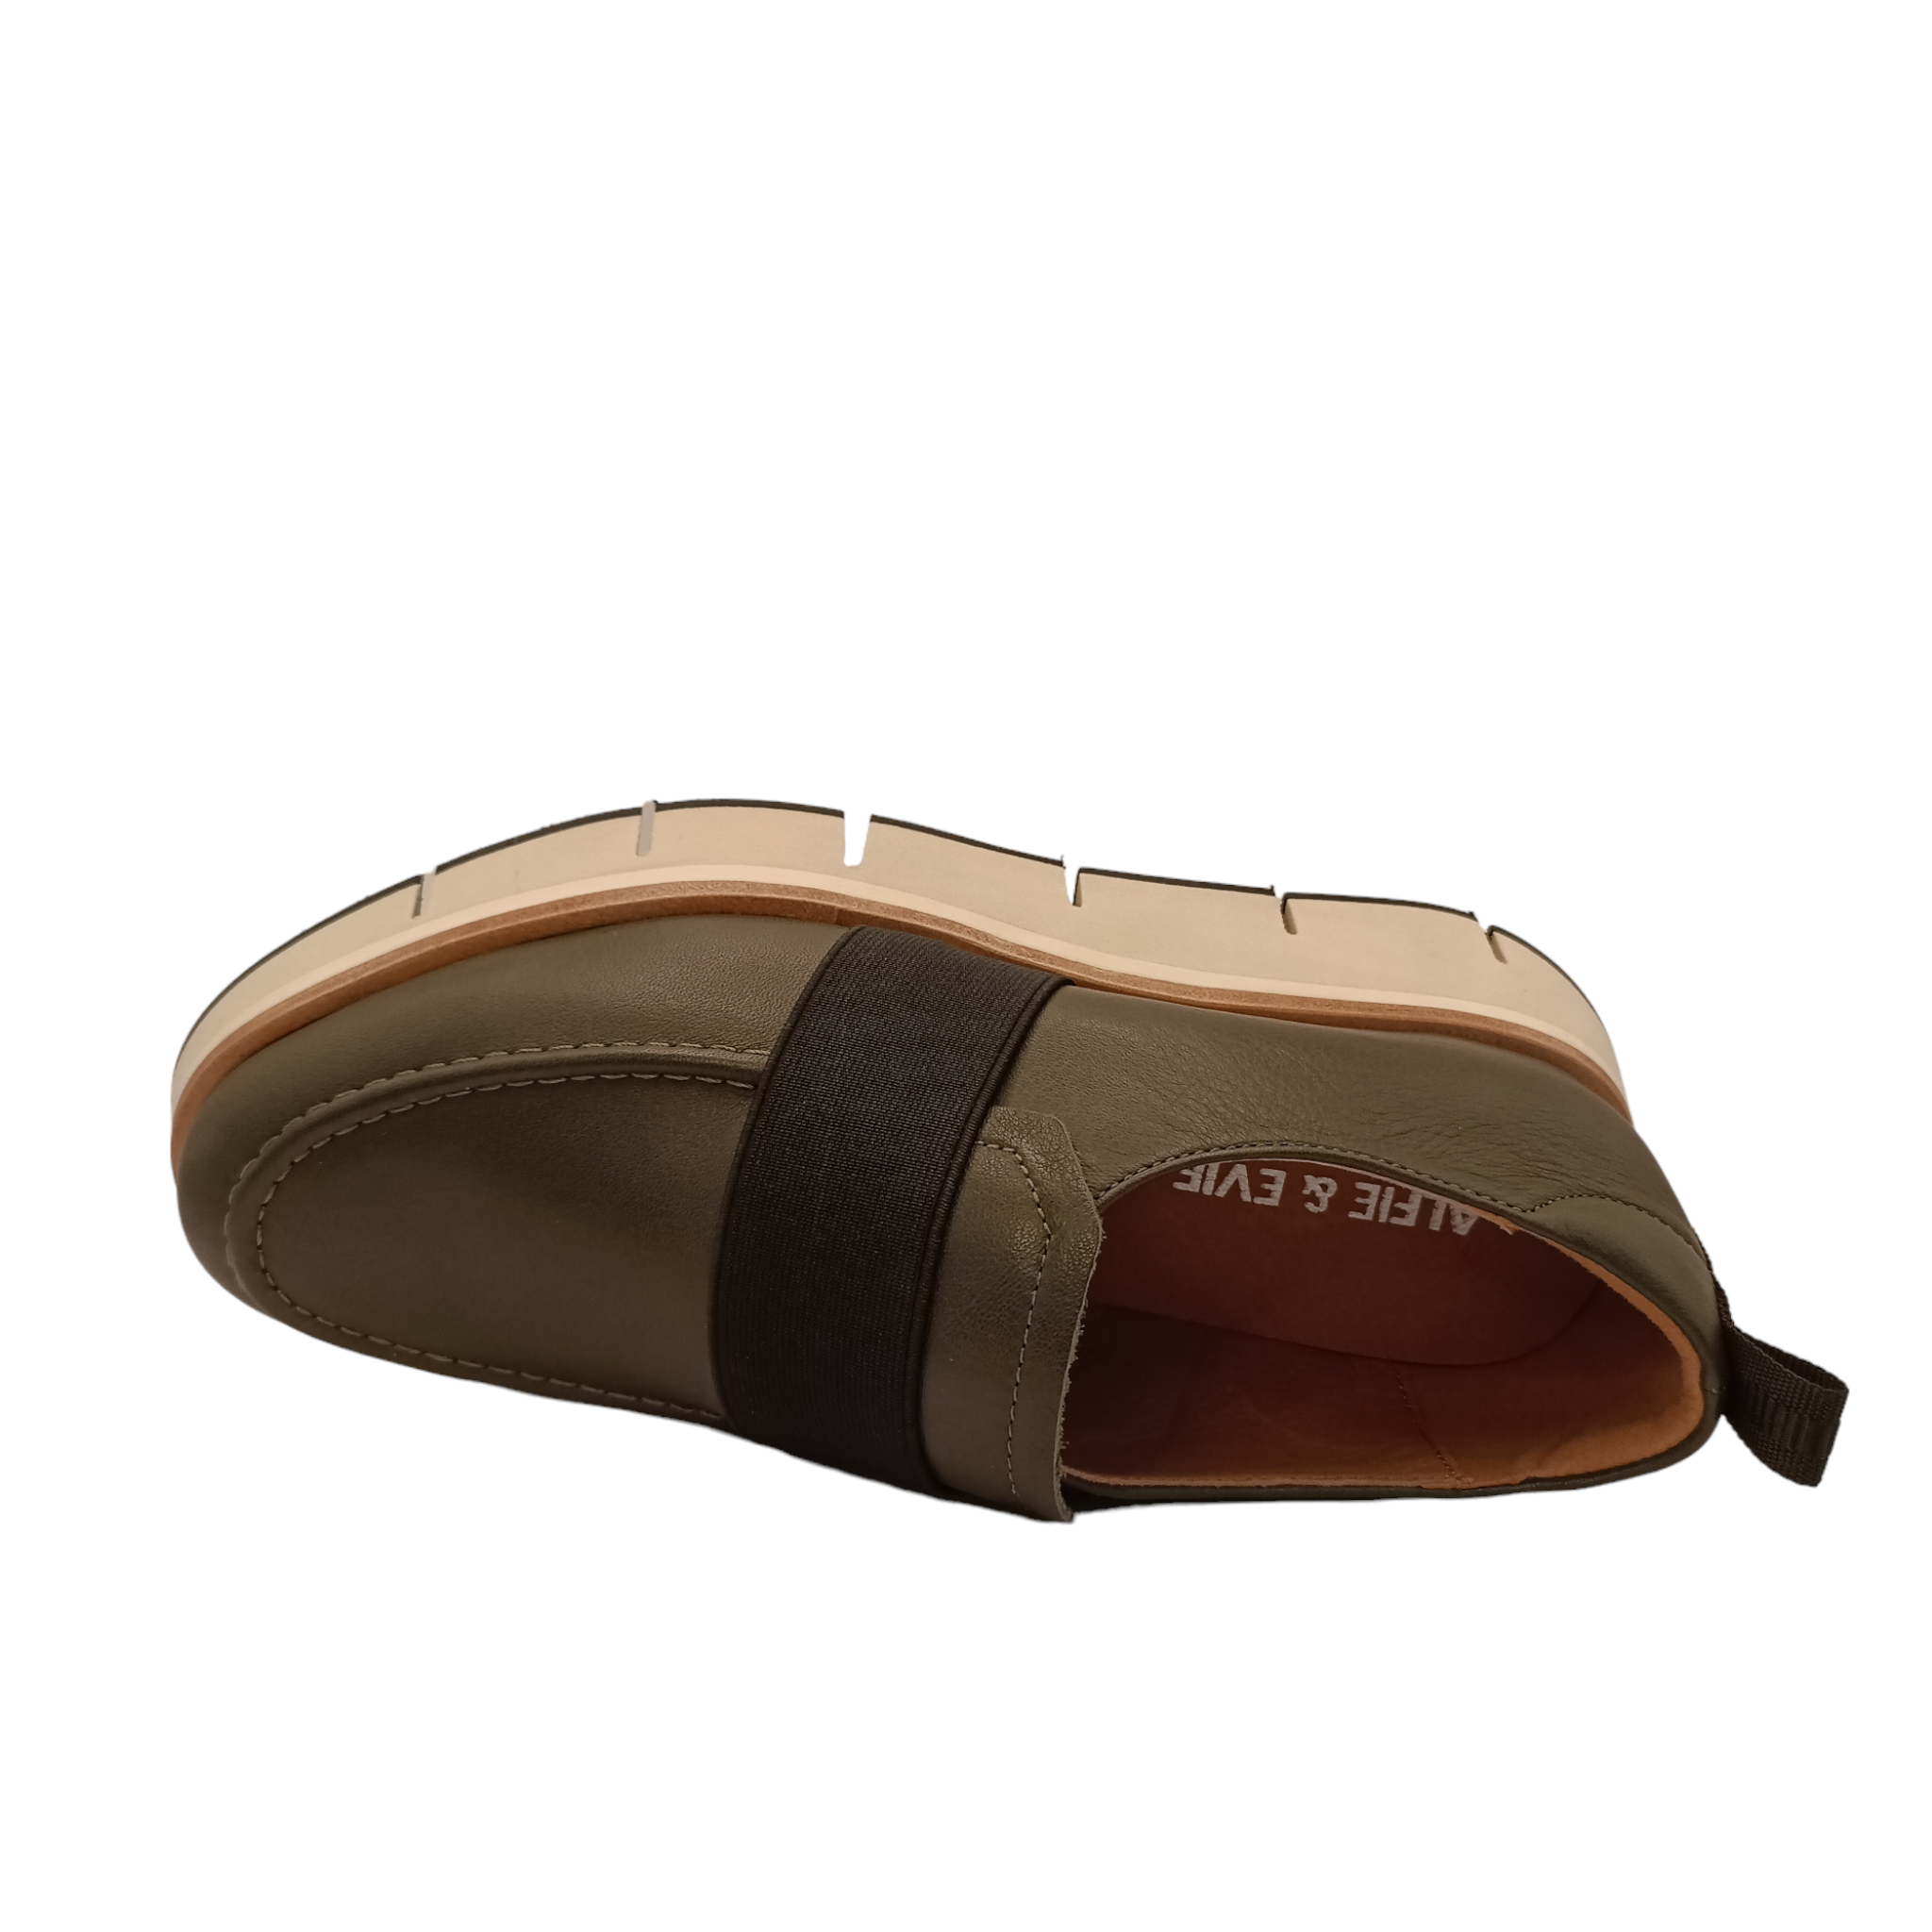 Shop Batty - with shoe&amp;me - from Alfie &amp; Evie - Shoes - Shoe, Winter, Womens